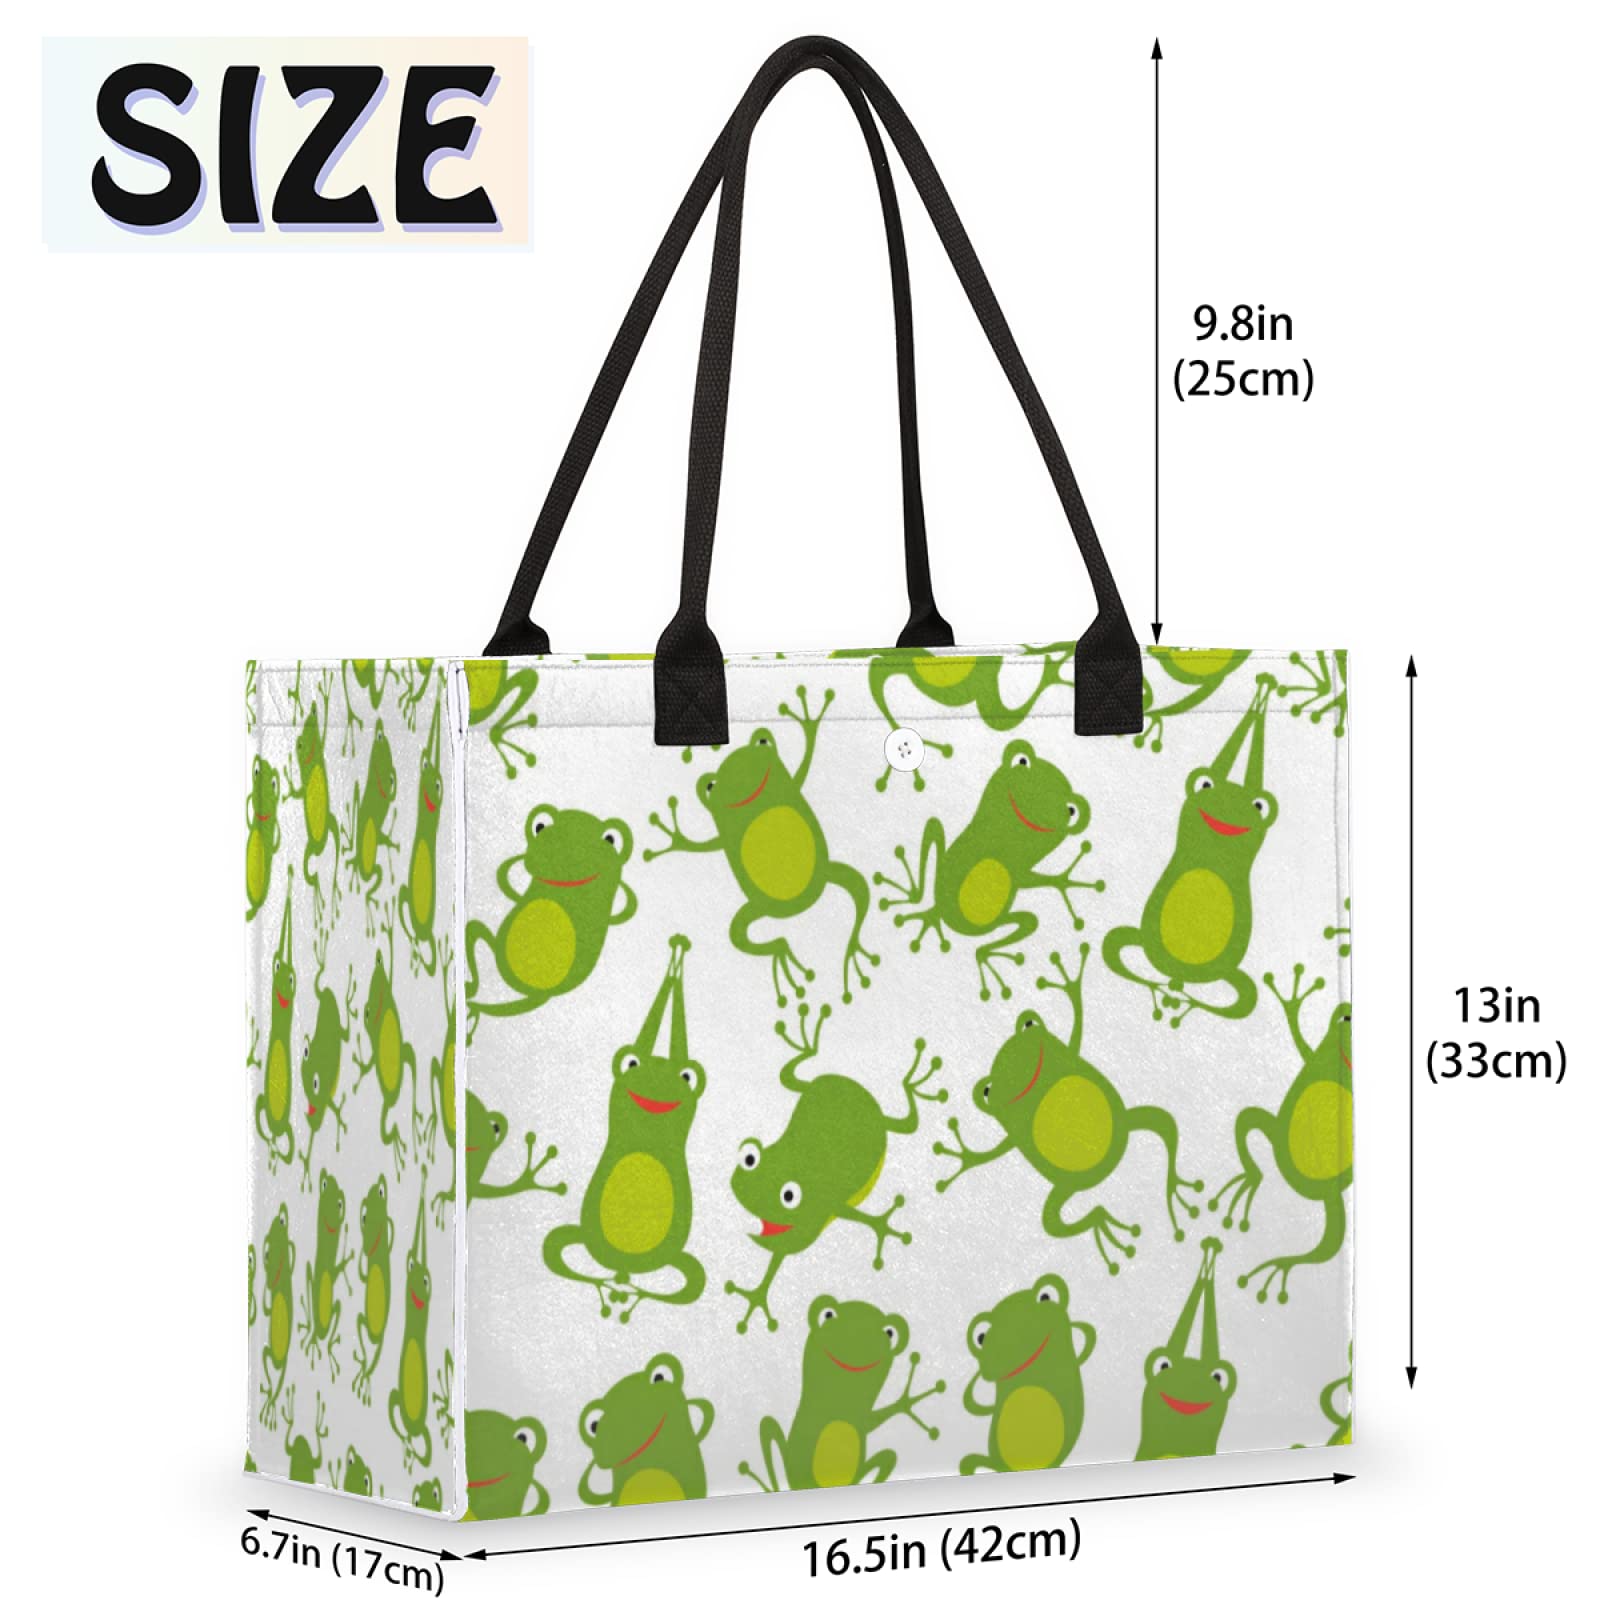 Pardick Frog Cute Tote Bag For Women Travel Bag Reusable Grocery Bag Utility Tote For Work Shopping Pool Beach Bag for Gift Outdoor